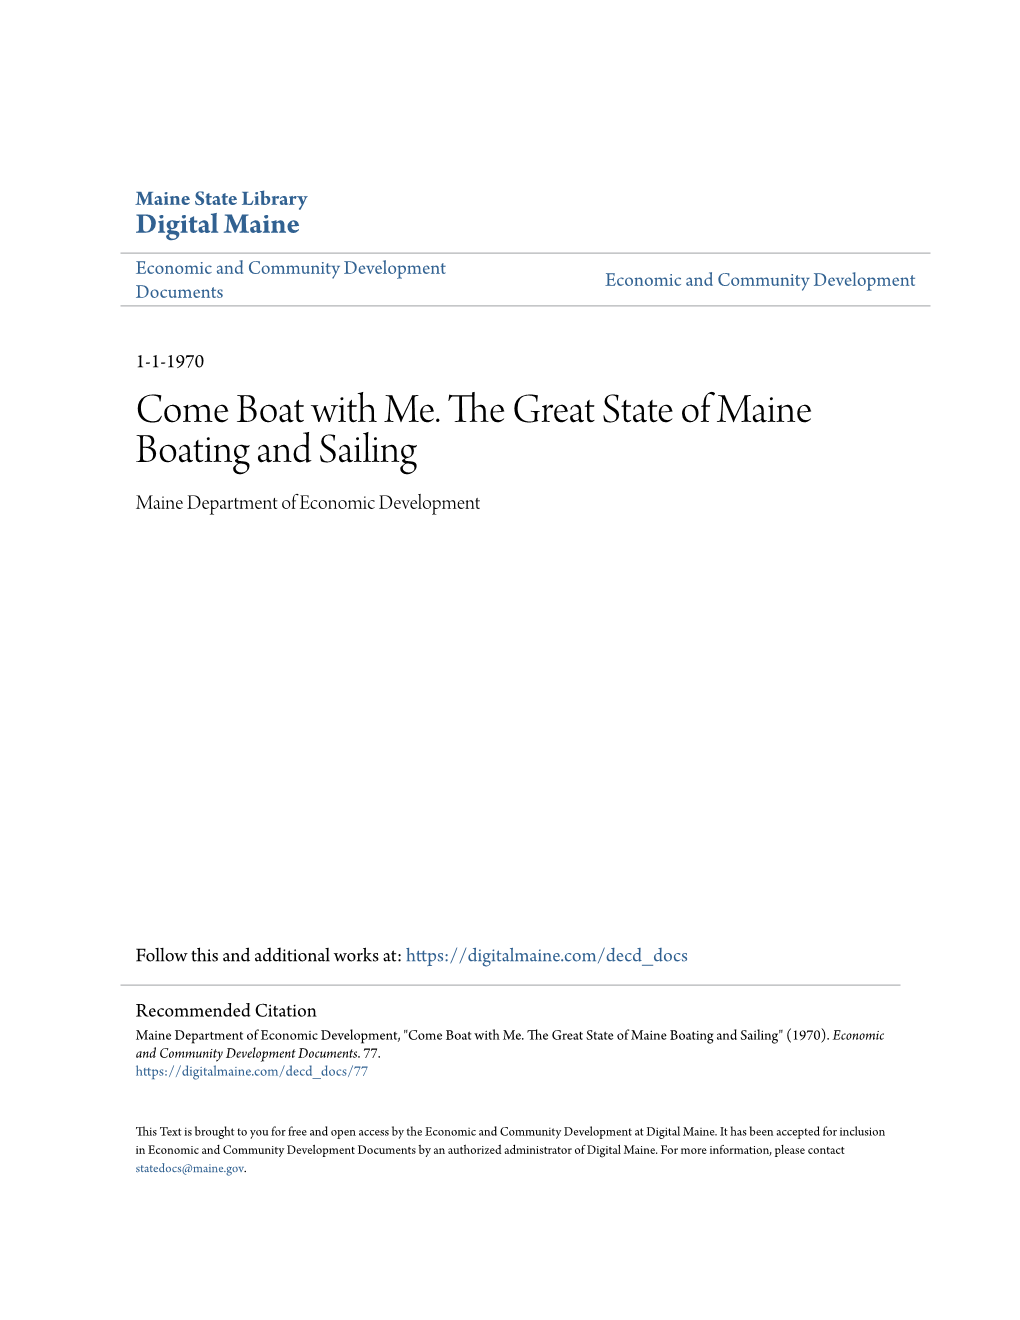 Come Boat with Me. the Great State of Maine Boating and Sailing Maine Department of Economic Development